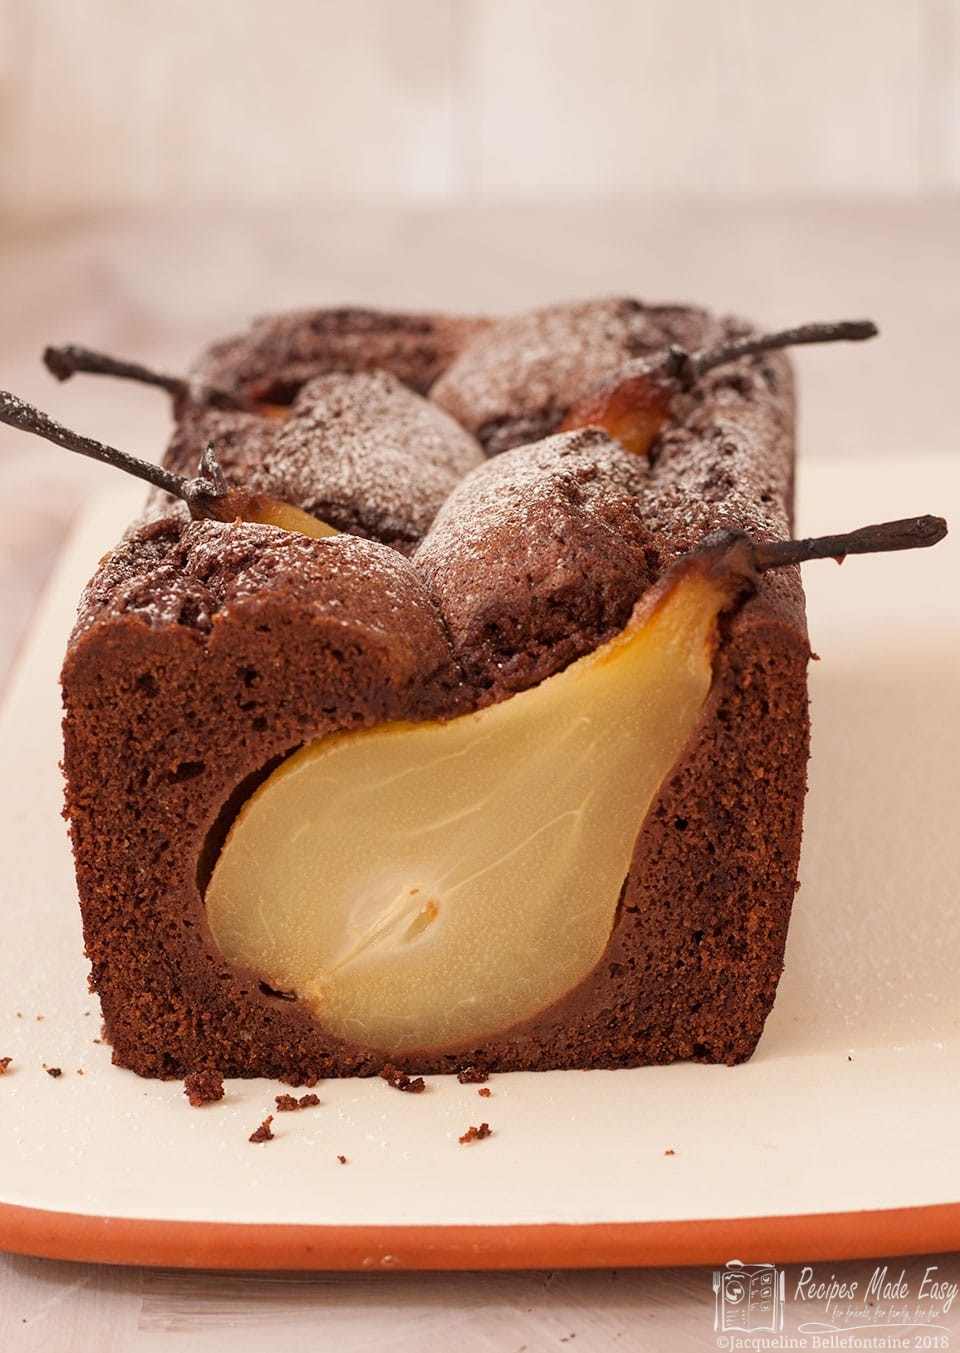 Sunken pear and chocolate cake by Recipes Made Easy, shown with a slice cut from the end